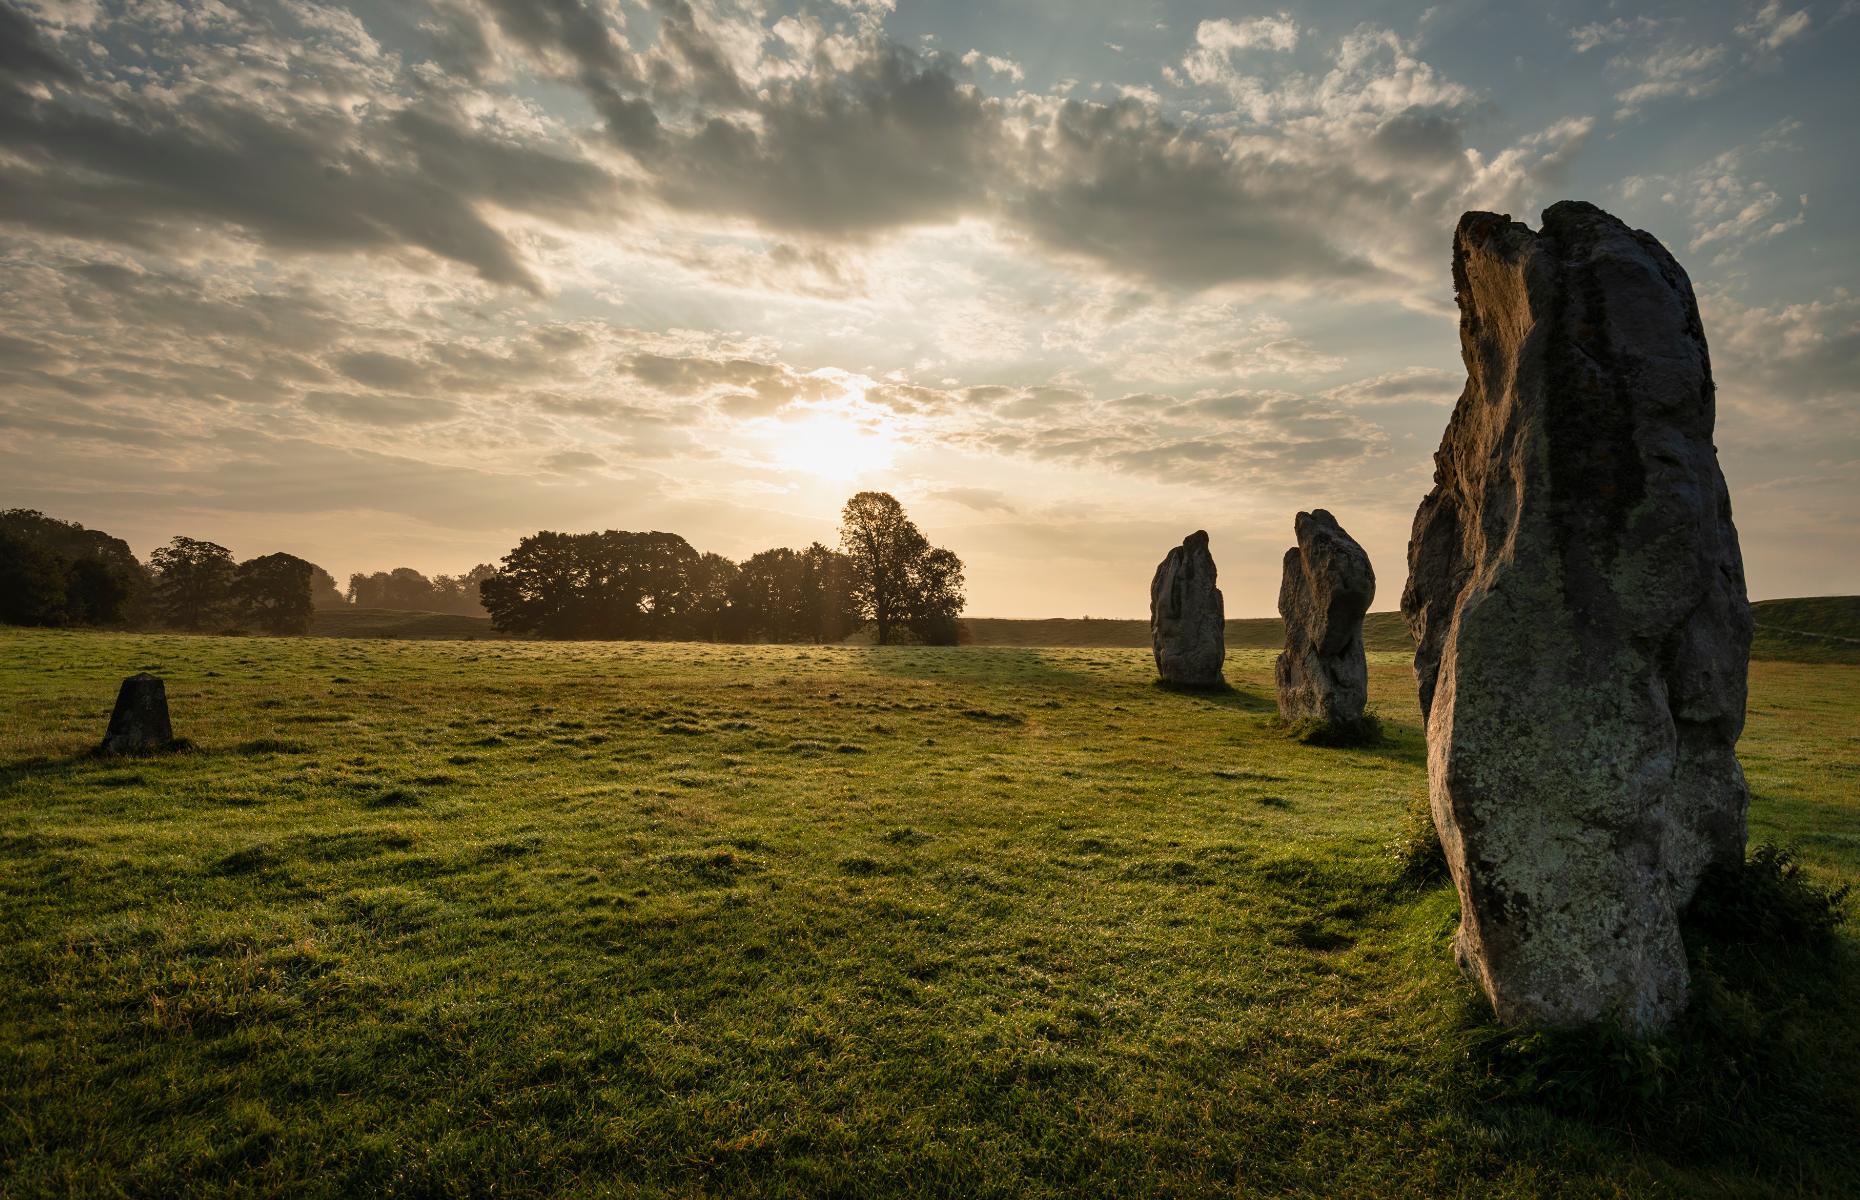 <p>Close to the more famous Stonehenge but equally fascinating, <a href="https://www.english-heritage.org.uk/visit/places/avebury/">Avebury</a> is a sprawling Neolithic complex that includes the largest stone circle in Britain. Originally made from around 100 stones, the site was erected and often altered over six centuries from 2850 BC. Avebury’s spectacular remains include banks, ditches and three stone circles.</p>